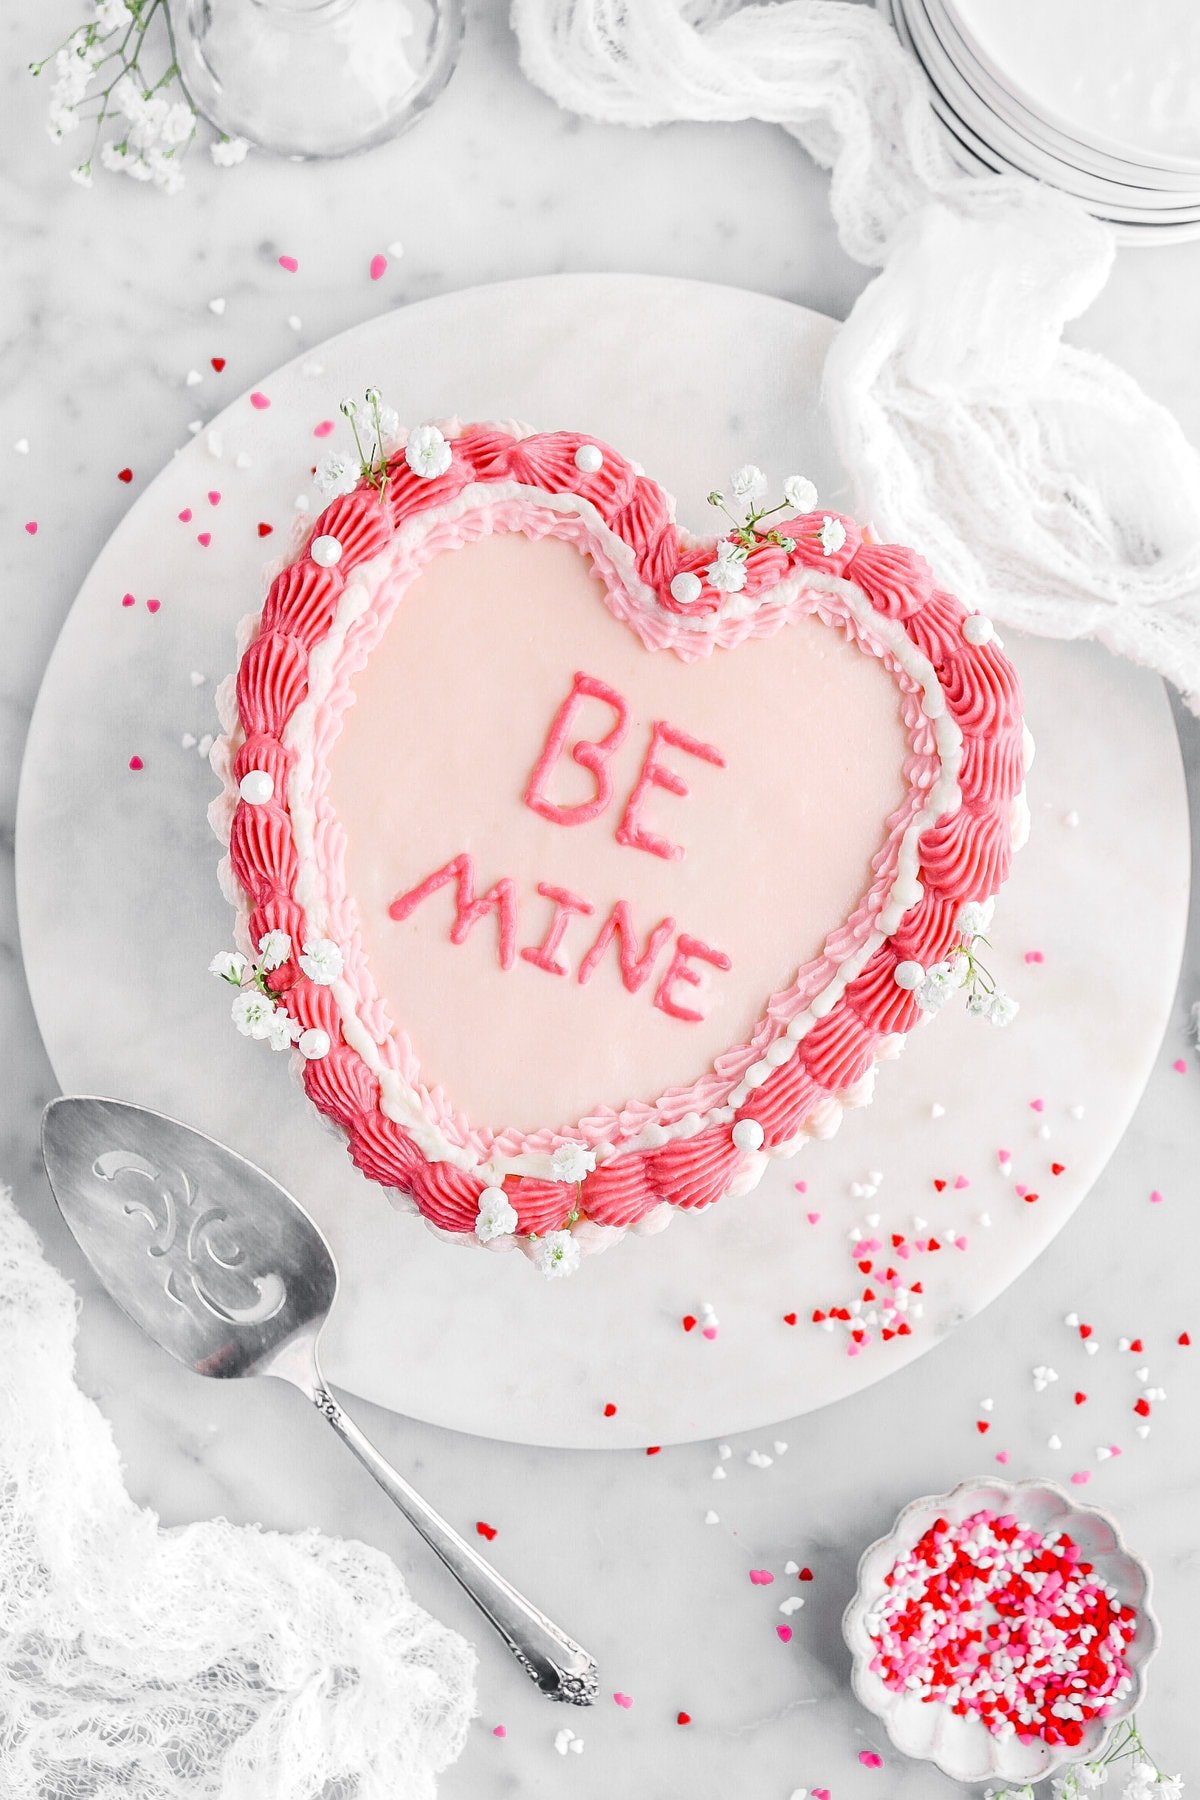 overhead image of decorated pink heart shaped cake with "be mine" written on top with white cheese cloth, heart shaped sprinkles, and a cake knife beside.